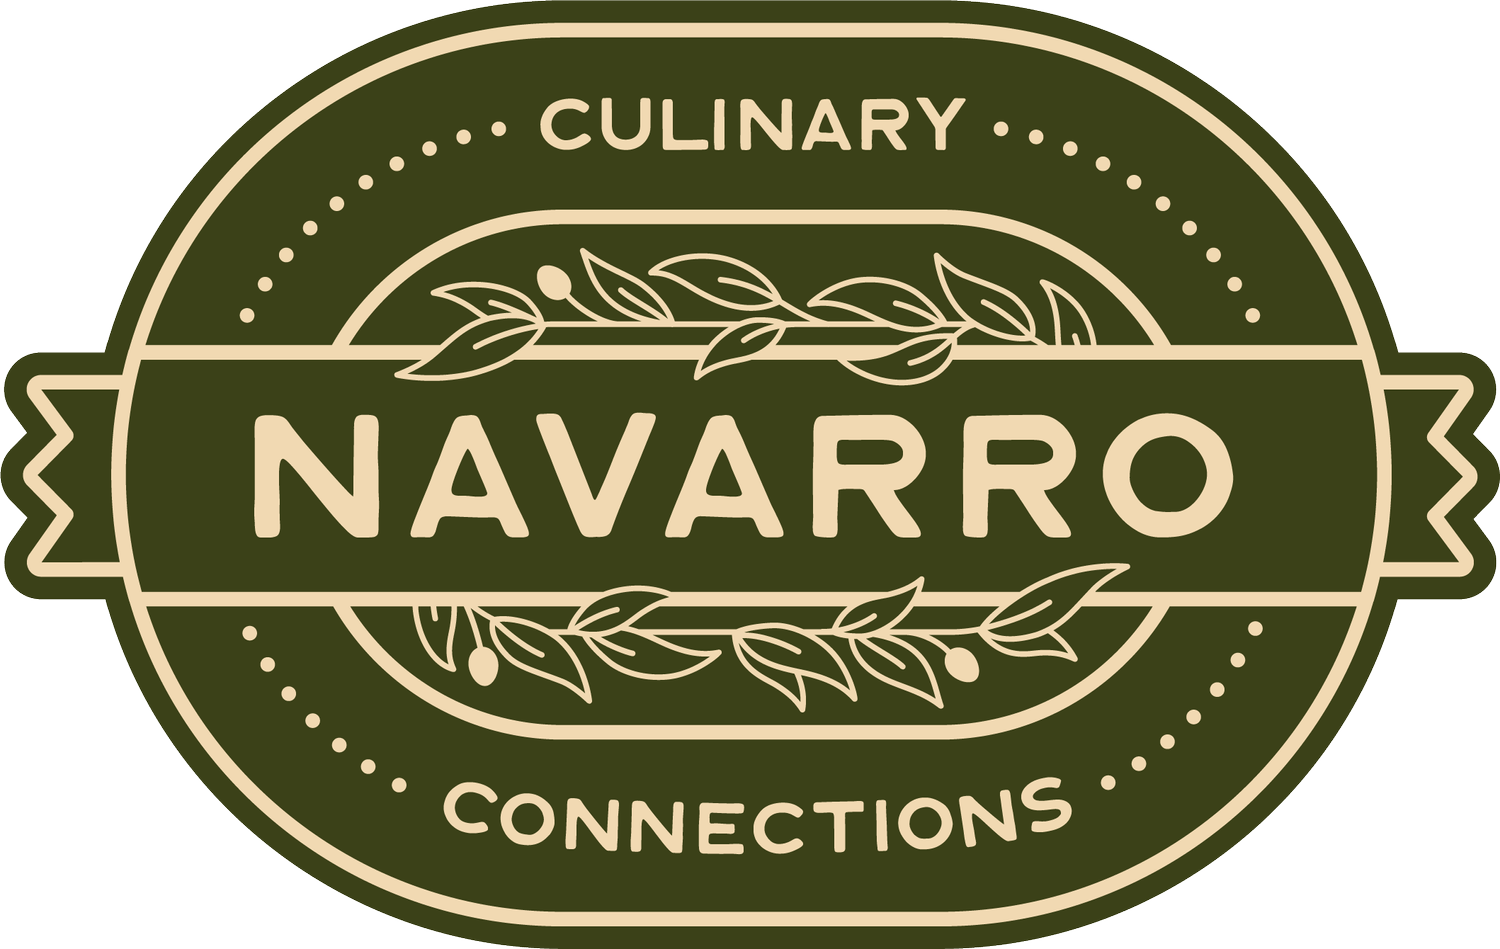 Navarro Culinary Connections